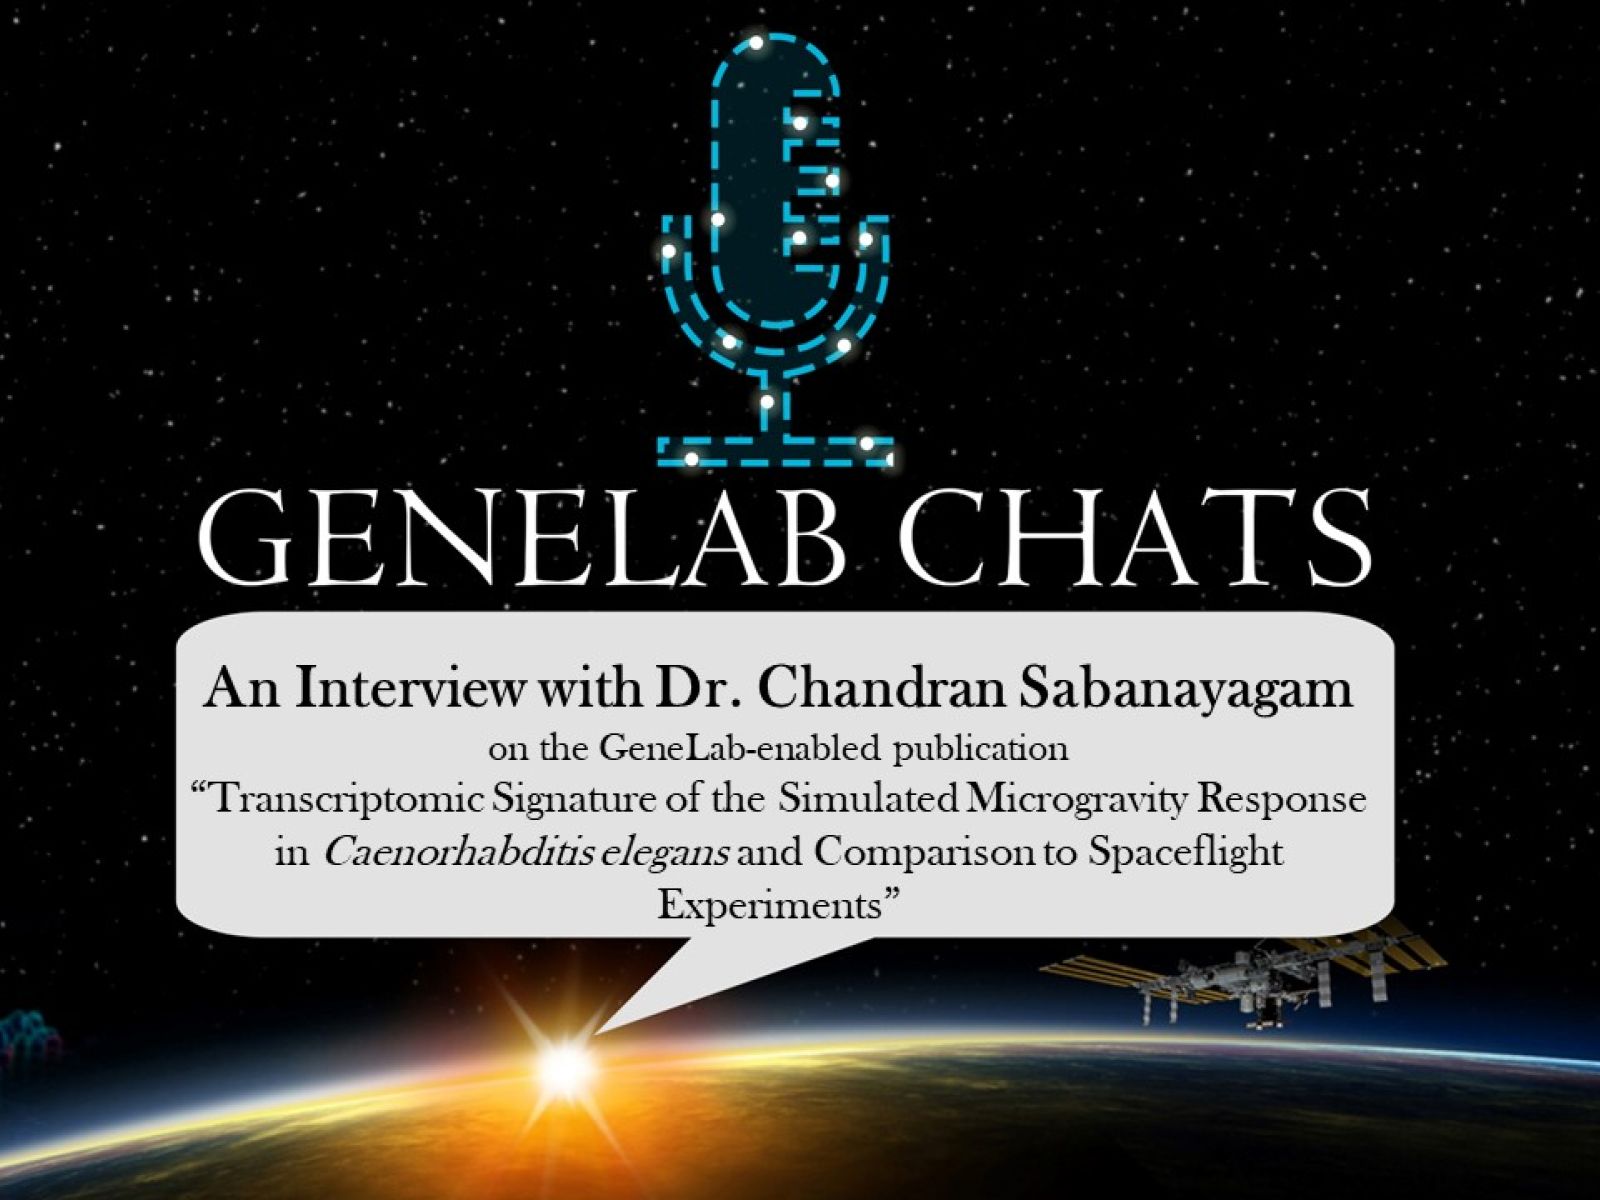 Title slide from GeneLab Chats